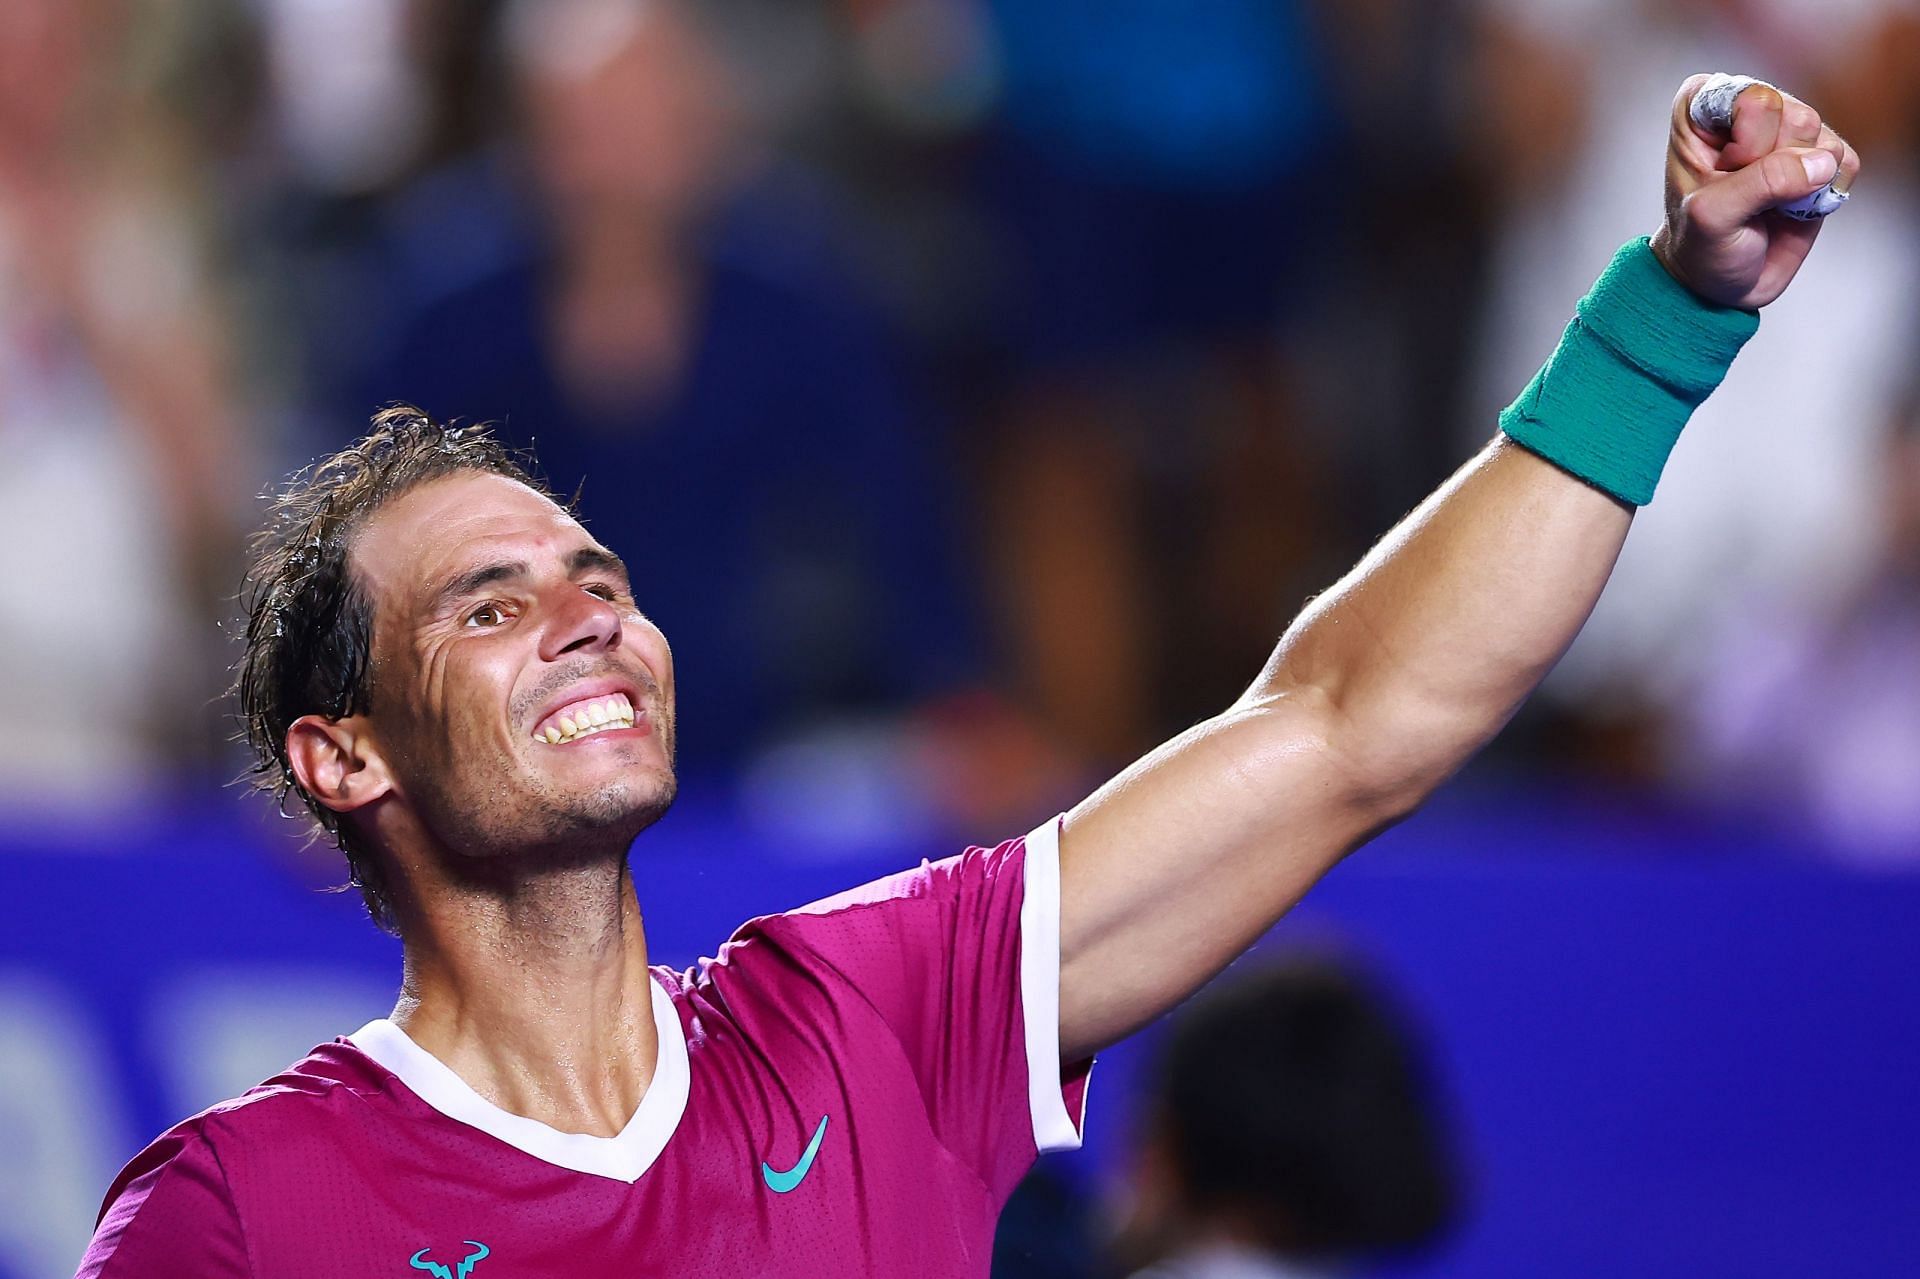 Acapulco 2022 Final, Rafael Nadal vs Cameron Norrie Where to watch, TV schedule, Live stream details and more